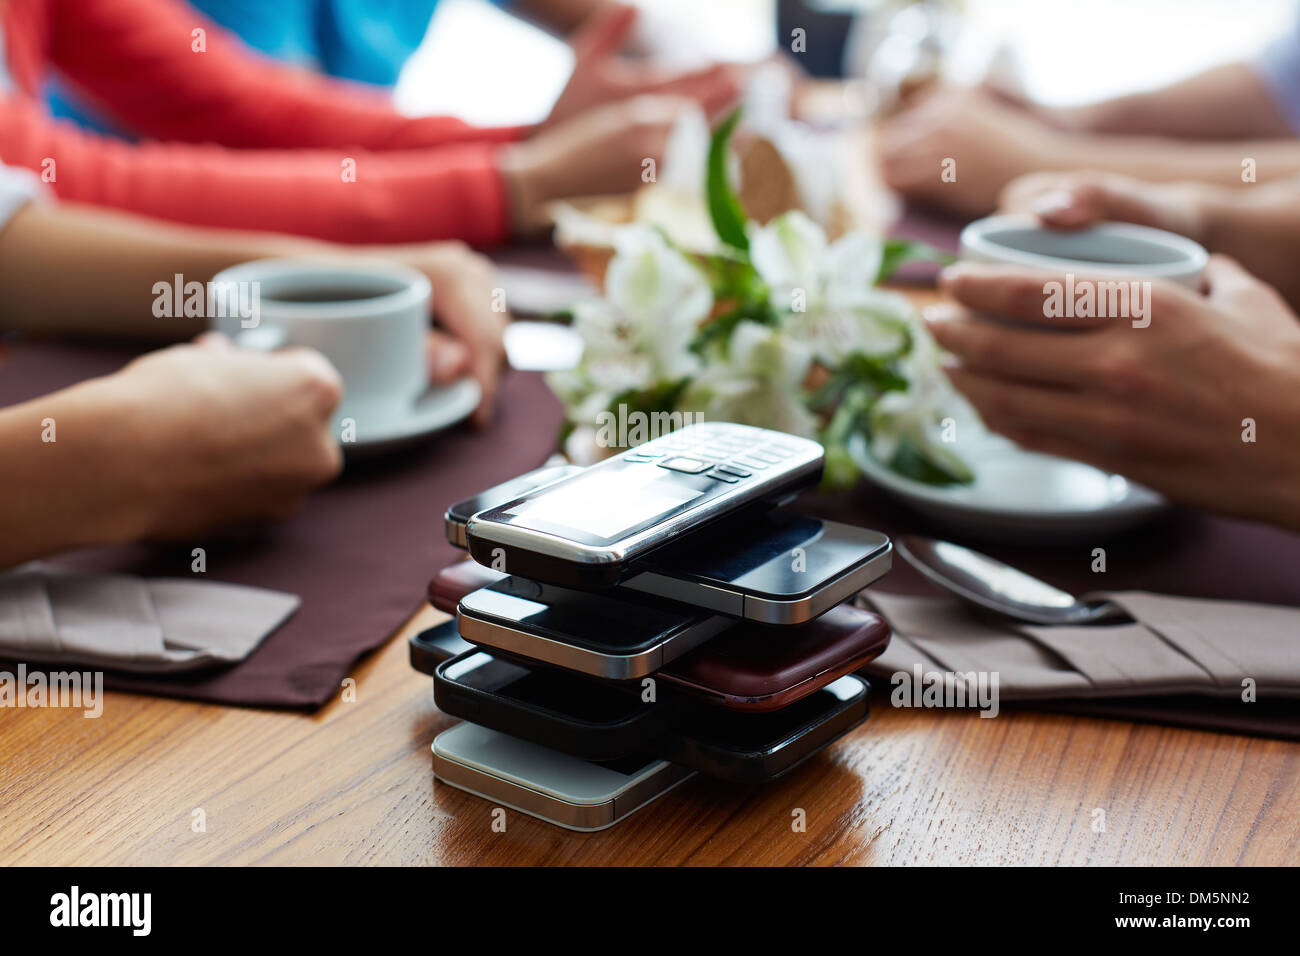 Stack of cellphones with group of friends on background Stock Photo